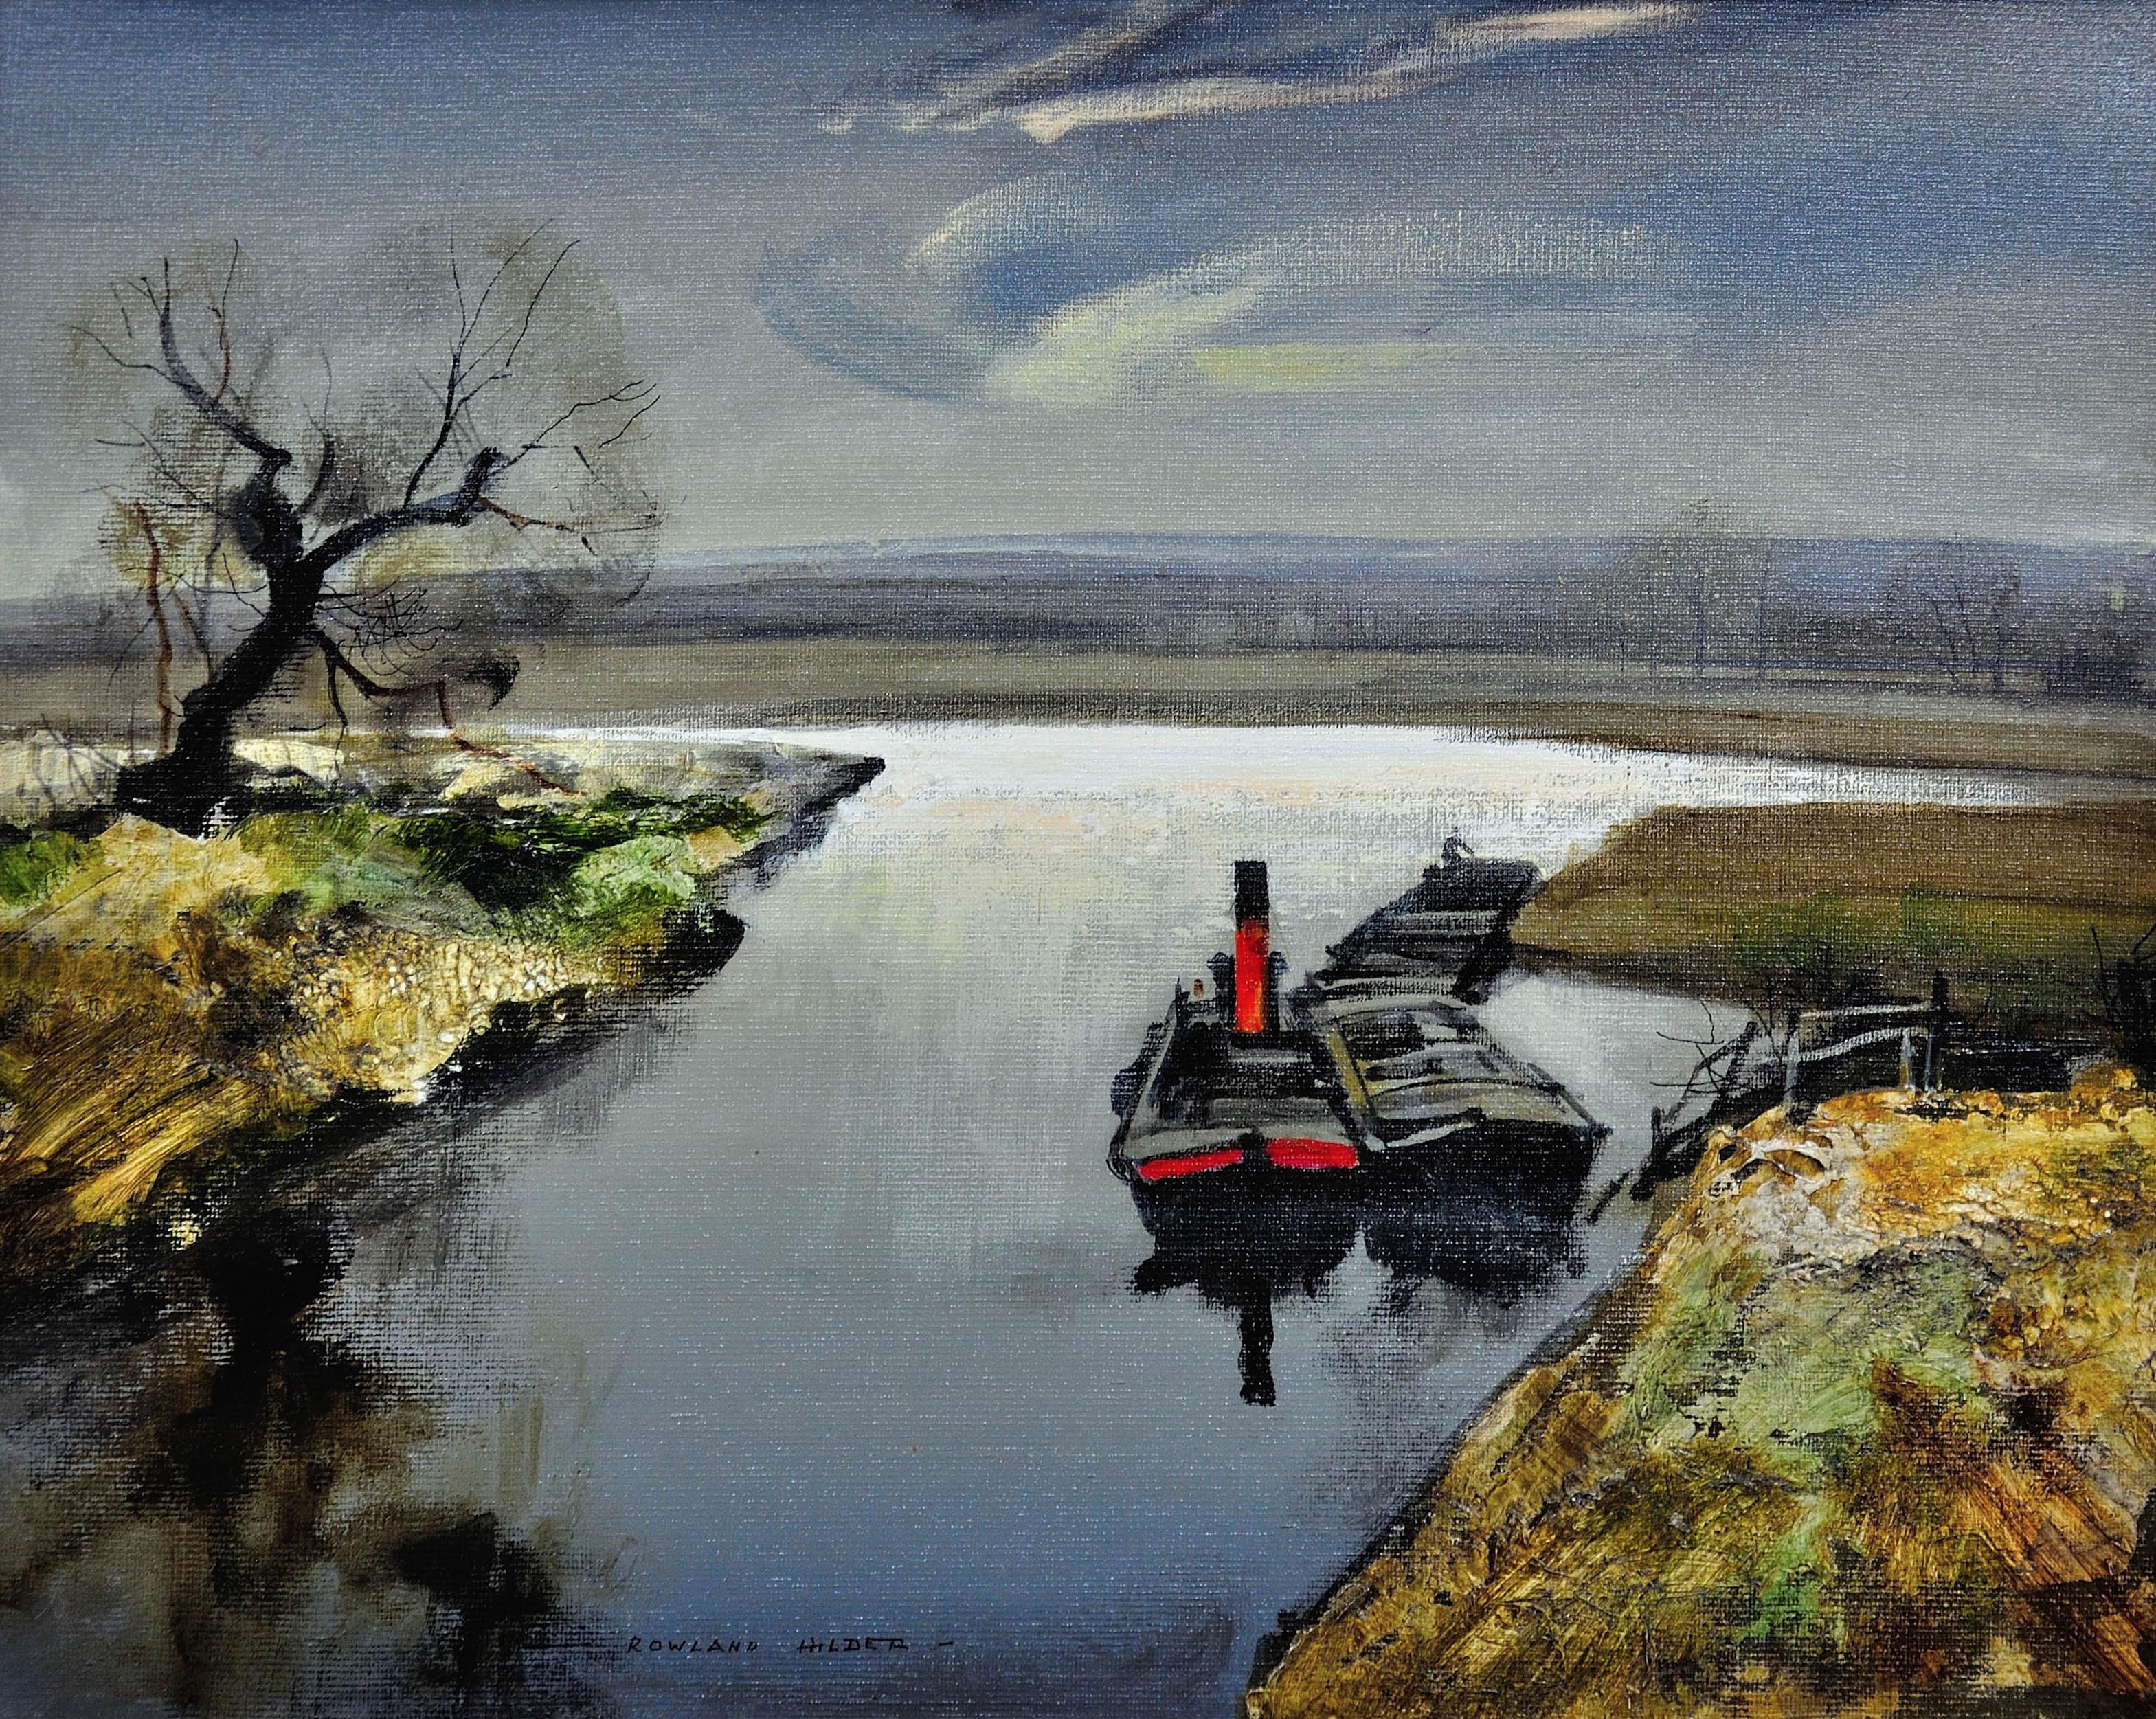 River Bure, Norfolk. East Anglia. English Rural Landscape. Tugboat and Barges. - Painting by Rowland Hilder